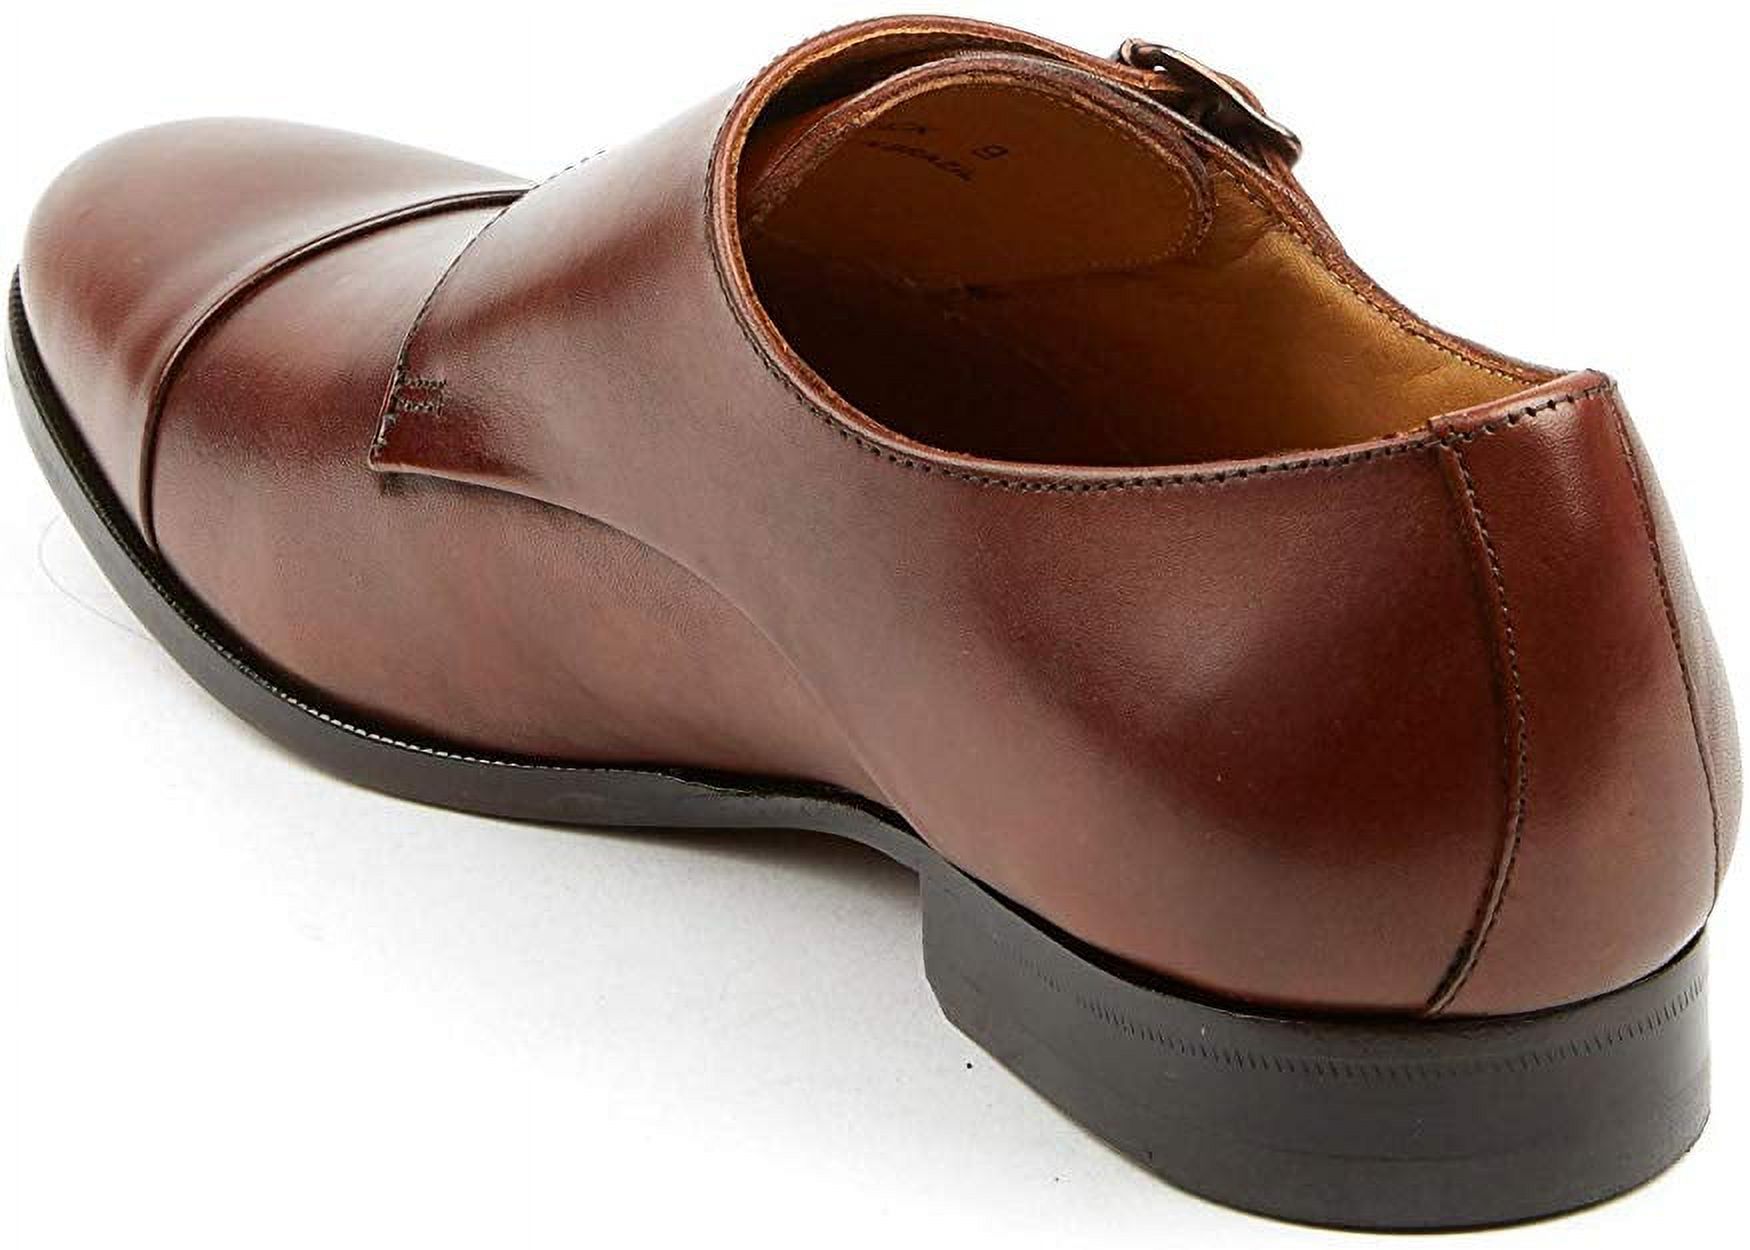 Pair Of Kings The Jack Brandy Leather Monk Casual Strap Buckle Dress Shoes (Brandy, 8) - image 2 of 2